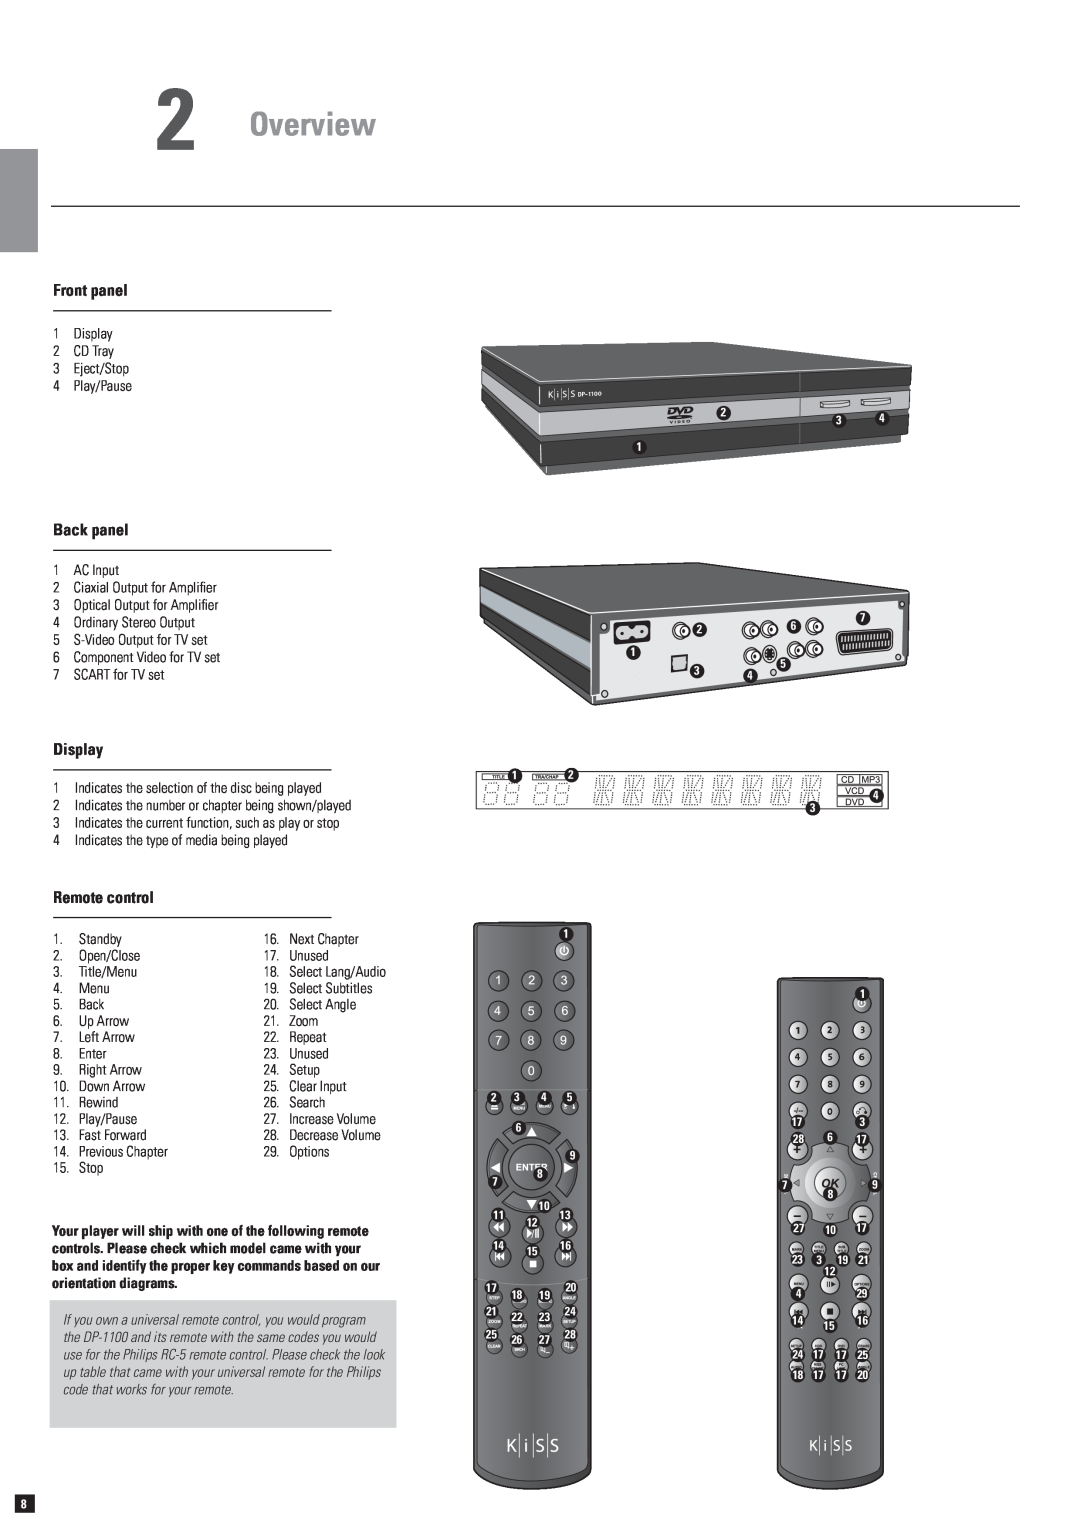 KiSS Networked Entertainment DP-1100 manual Overview, Front panel, Back panel, Display, Remote control 